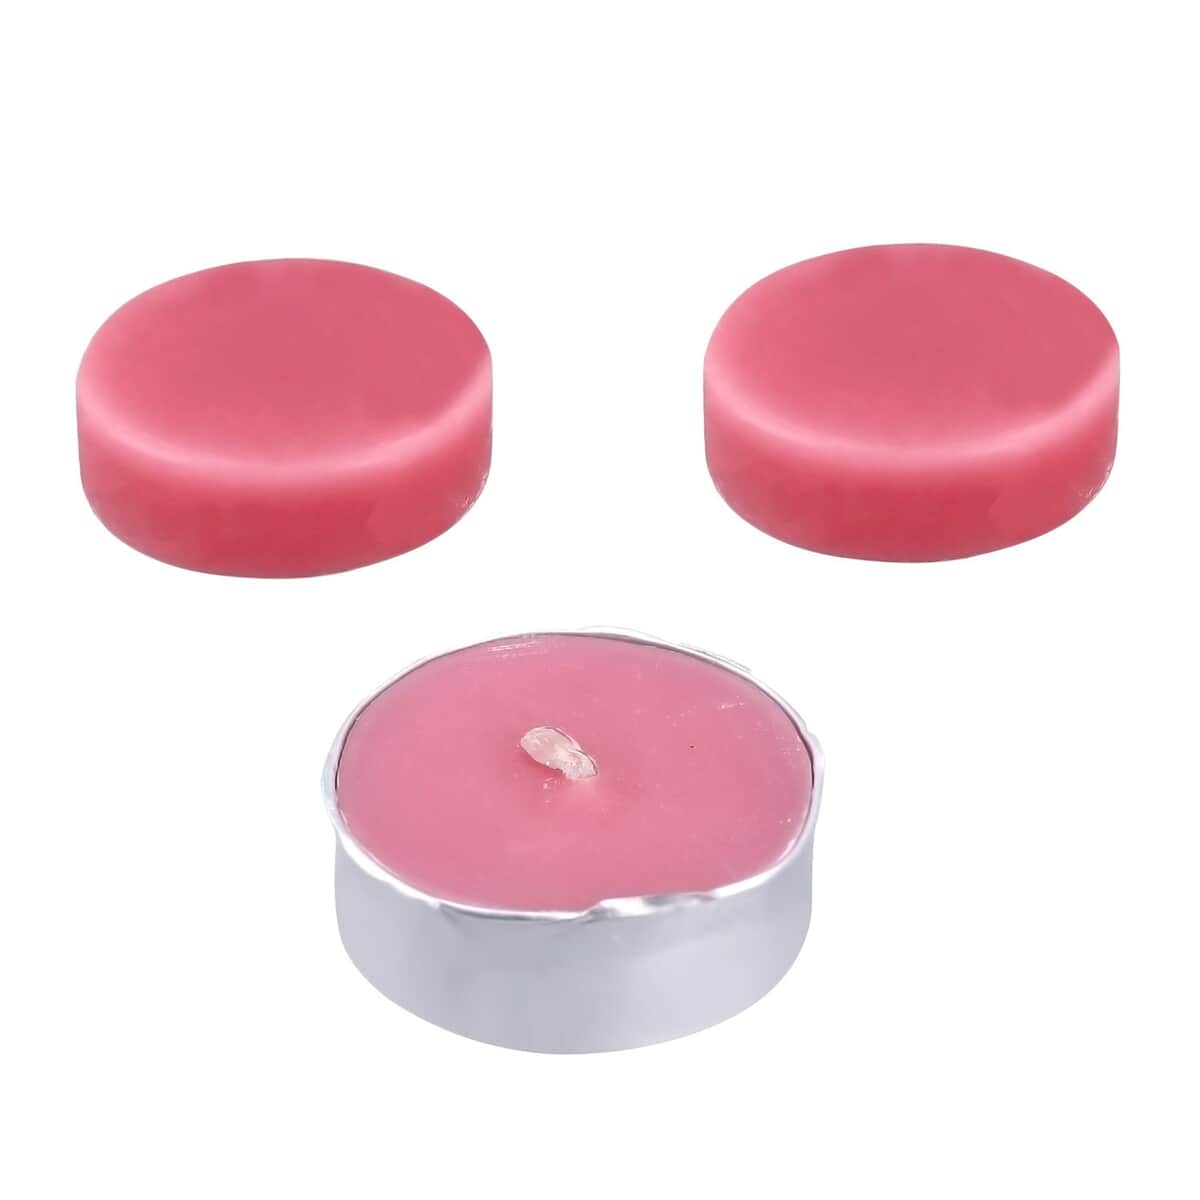 "Peacock Print Ceramic Wax Tart Burner Set  Fragrance: Frosted Vanilla Color: Pink Size: 3X3X7 Inches" image number 5